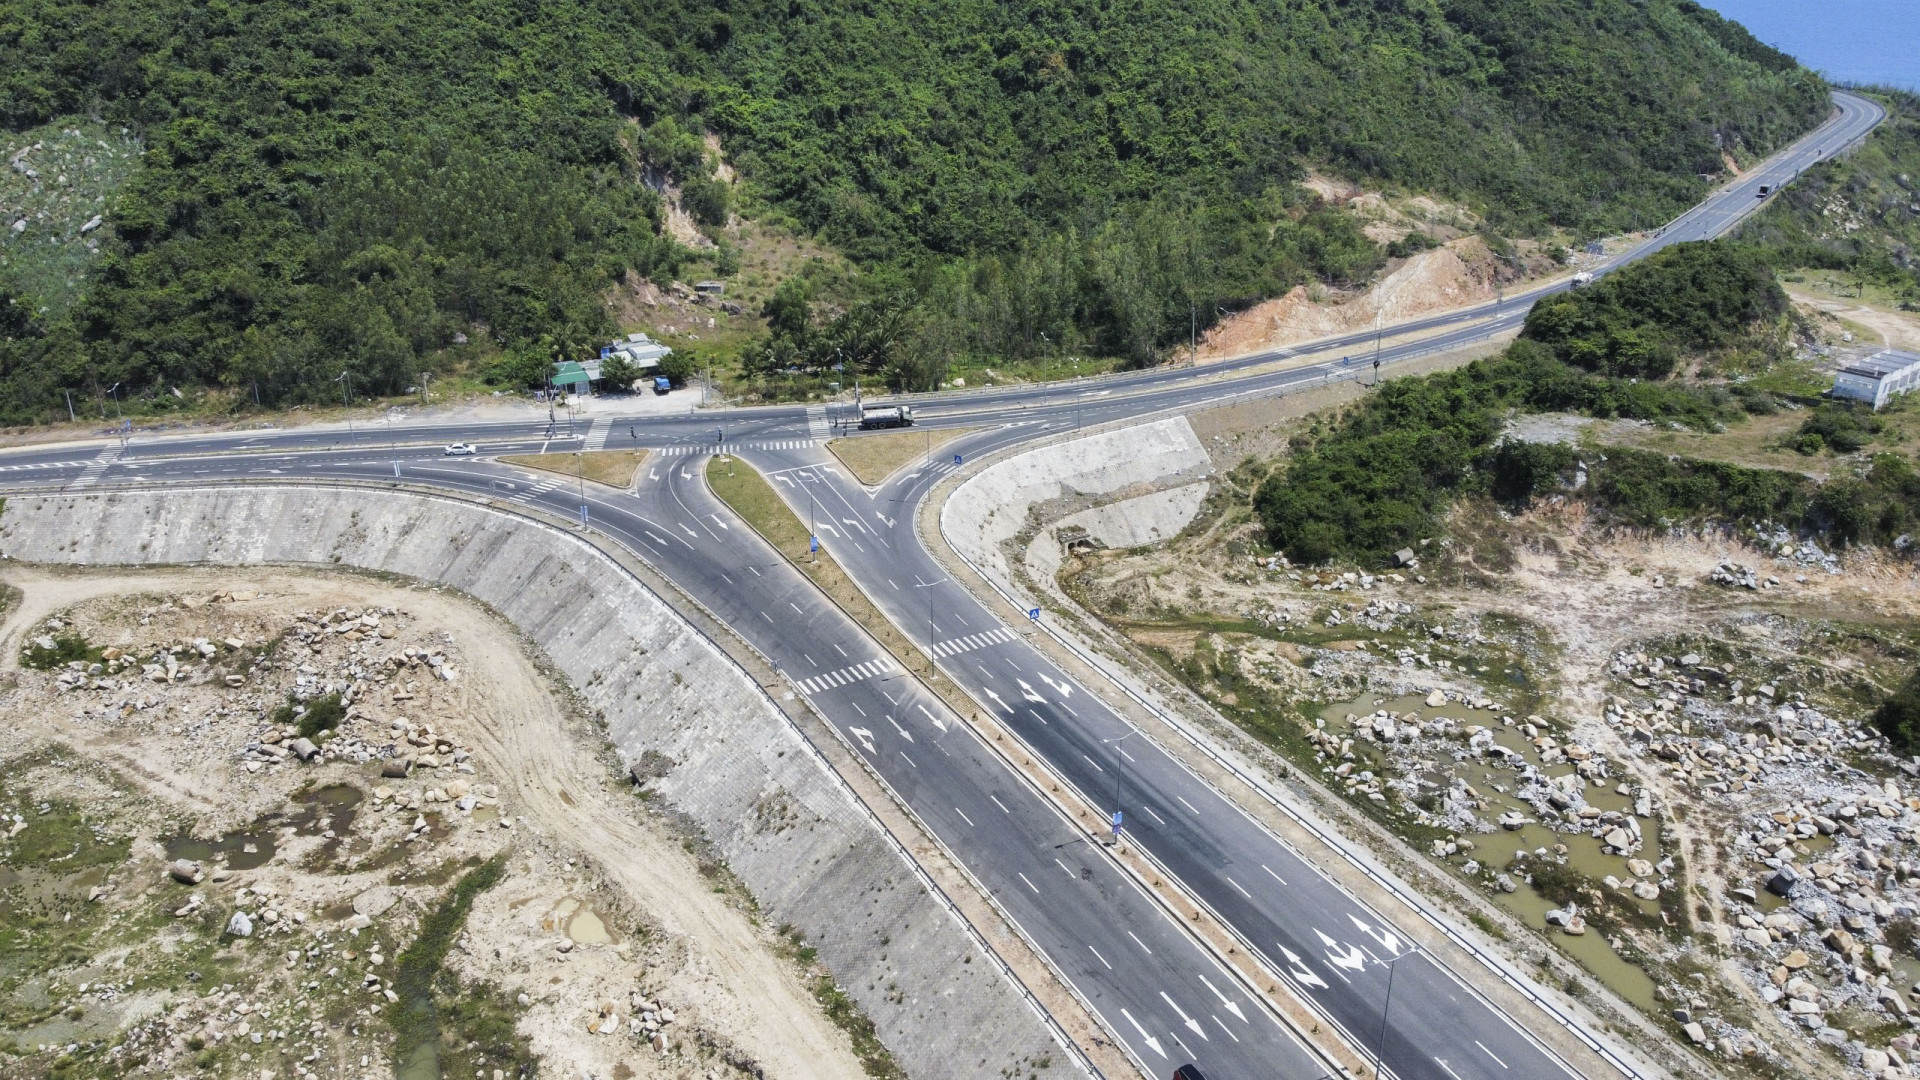 The project's starting point intersects with National Highway 1, Van Tho Commune, Van Ninh District, Khanh Hoa Province.